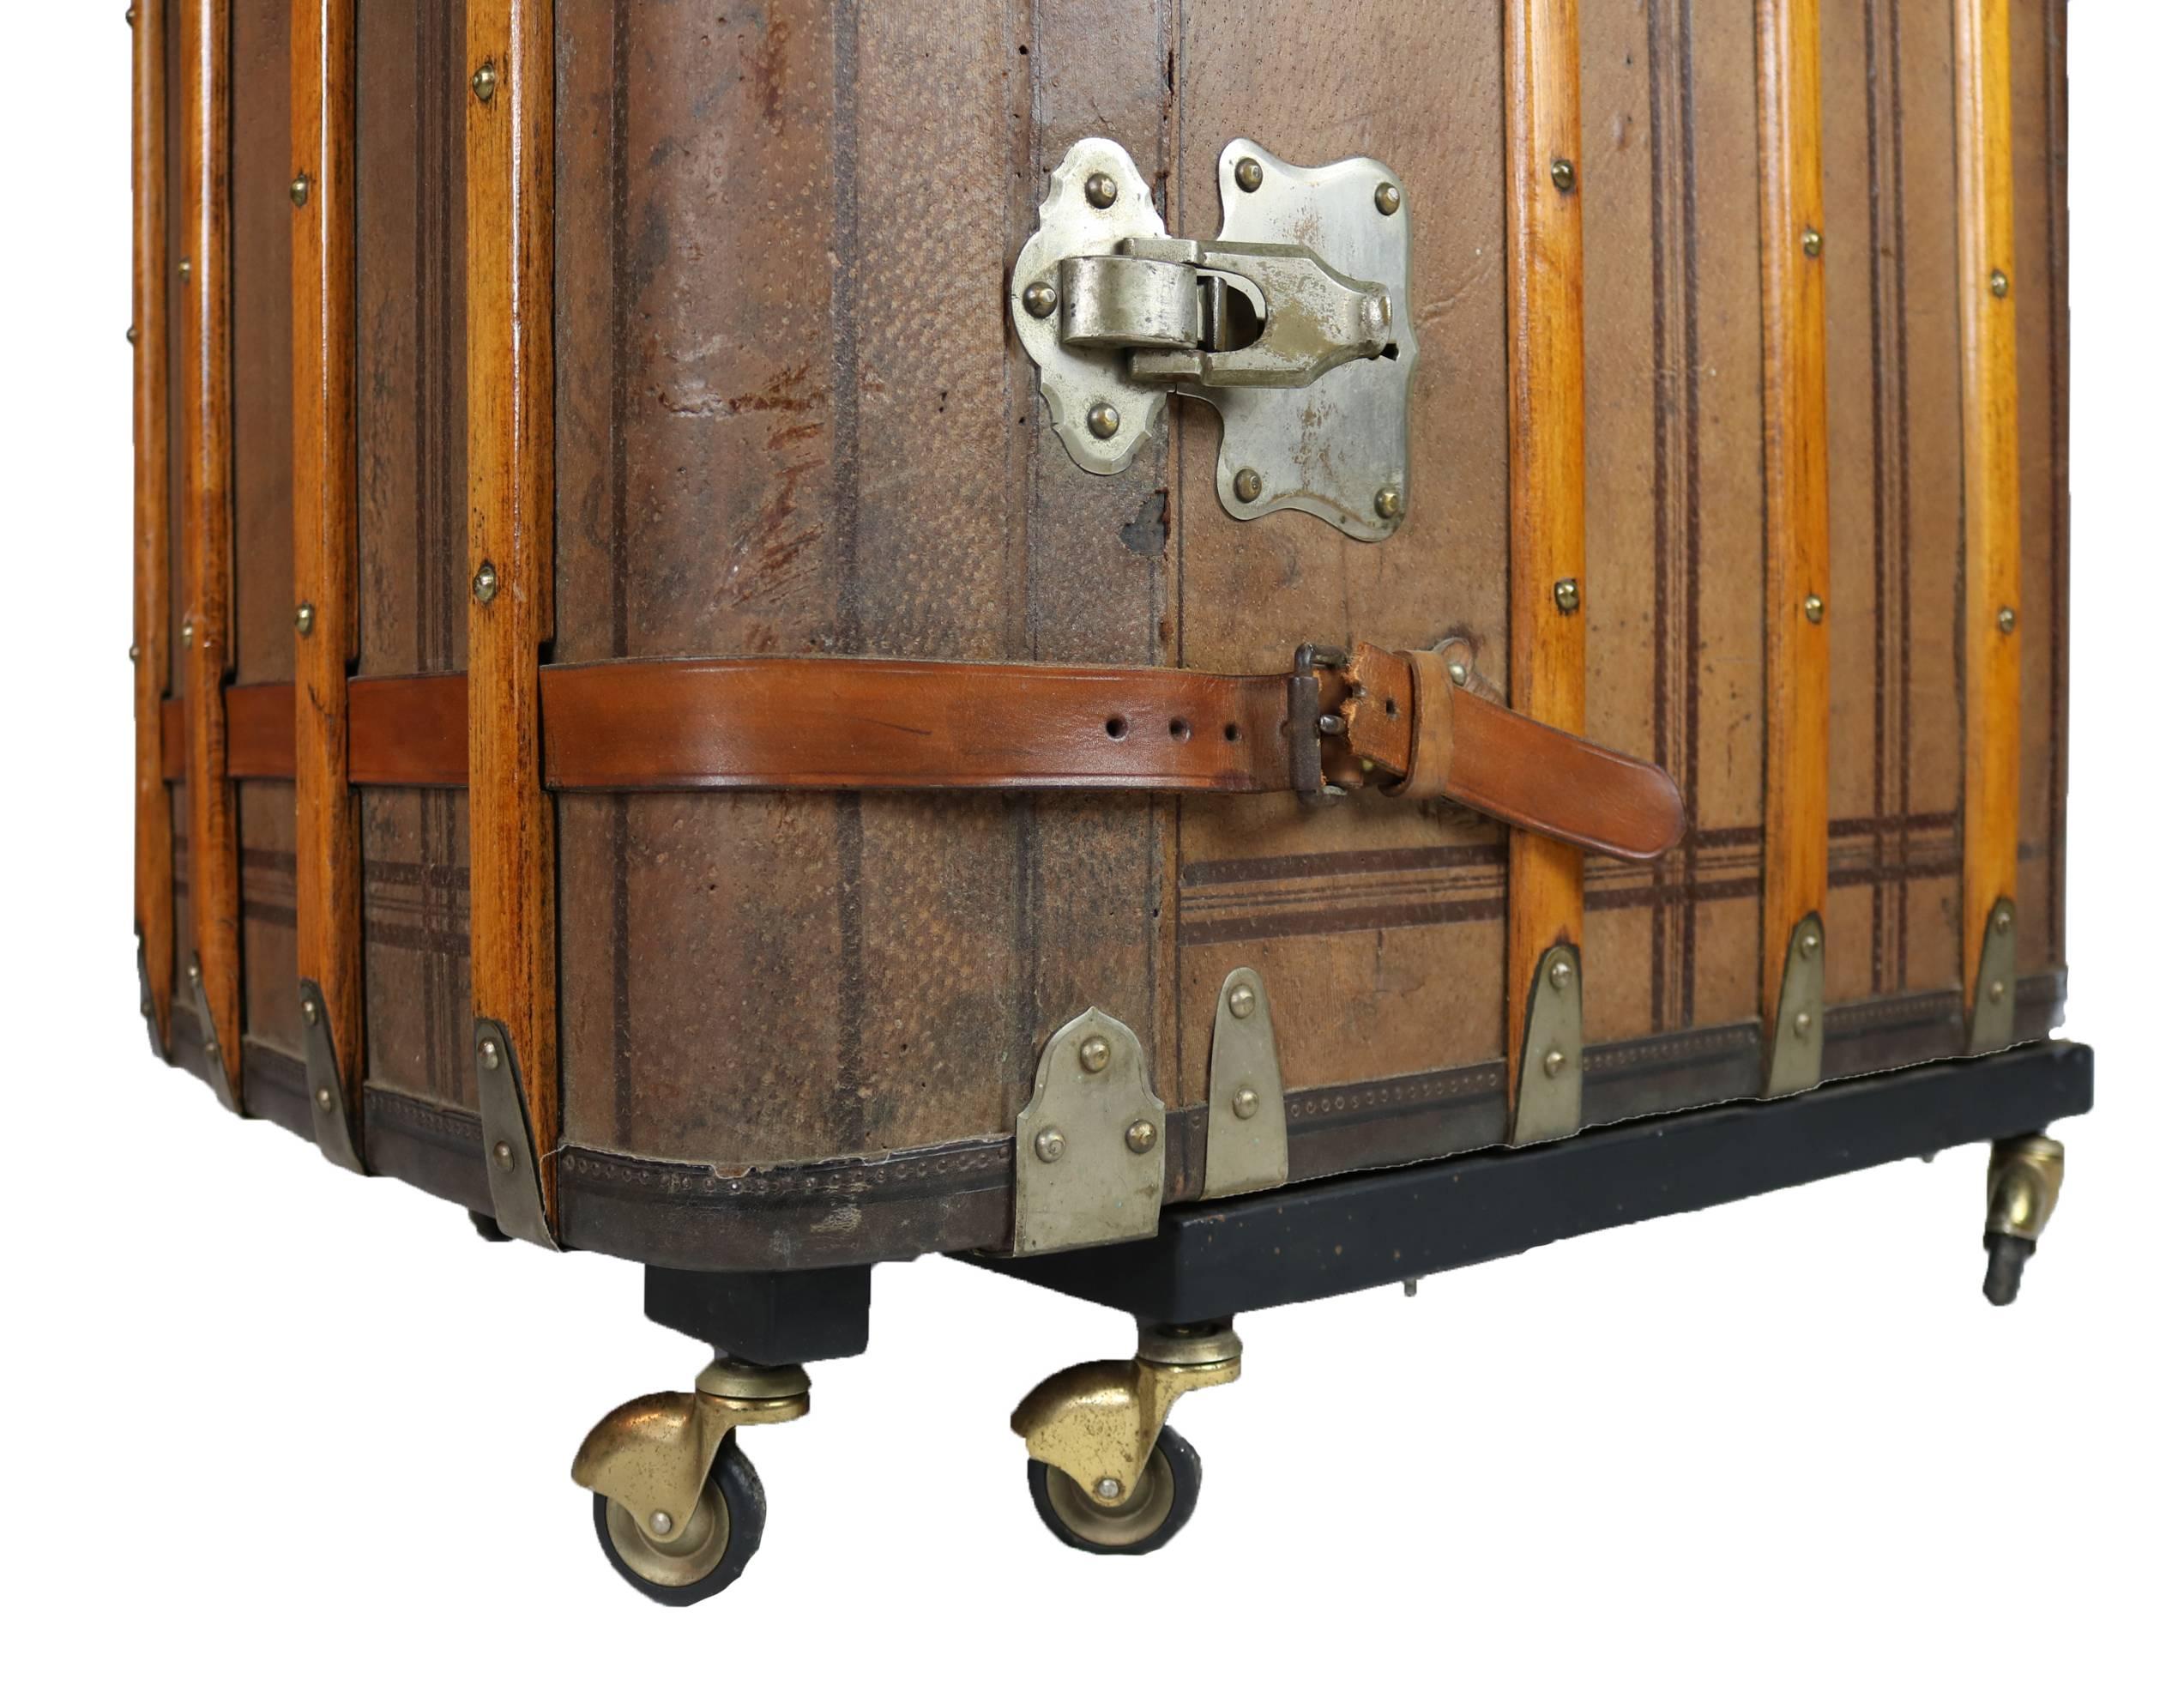 Good 20th century Travel Trunk sympathetically converted to a bar. The case bound in ash with nickel and brass fittings. It has a later bespoke interior with provision for glasses, bottles and decanters.